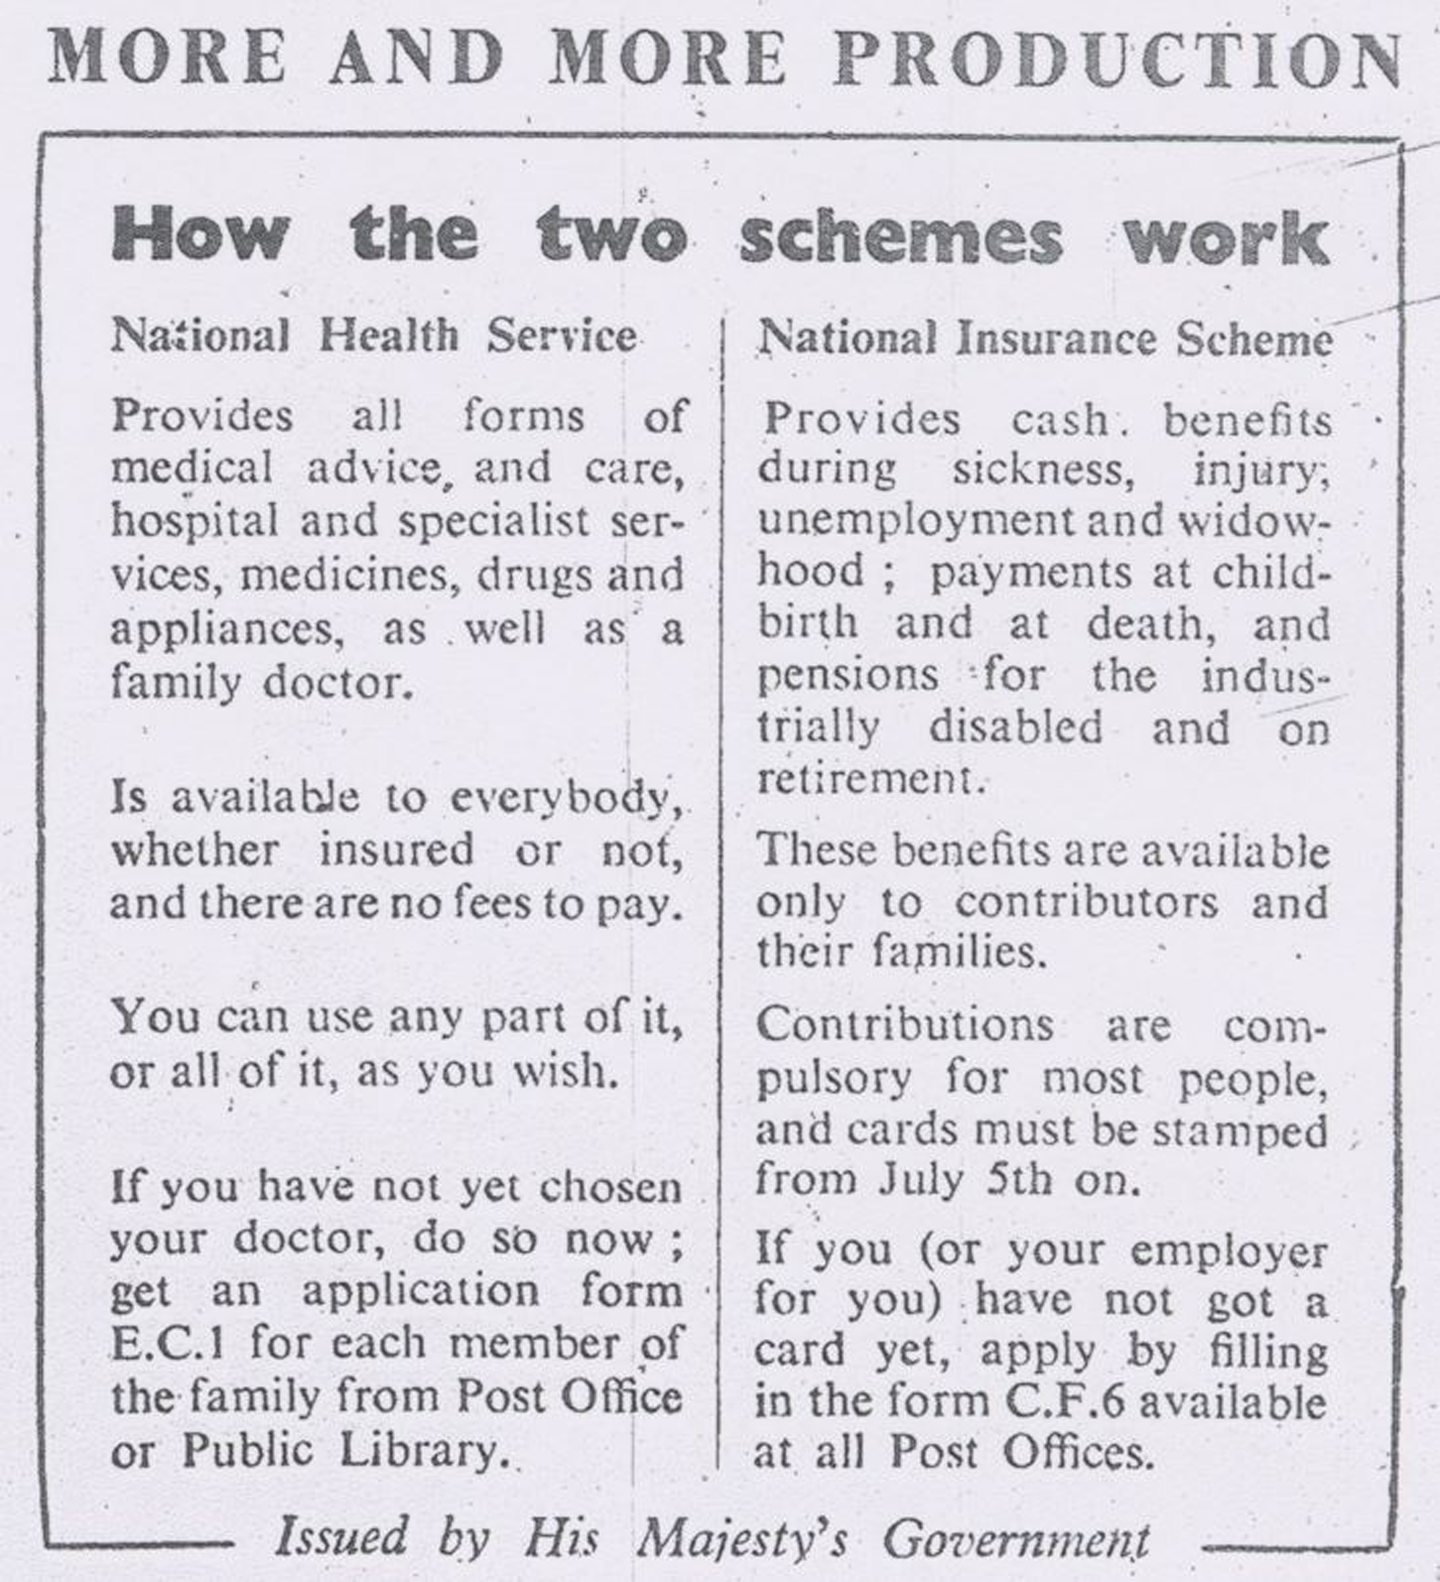 Clipping describing how the two schemes - Nation Health Service and National Insurance Scheme - work.